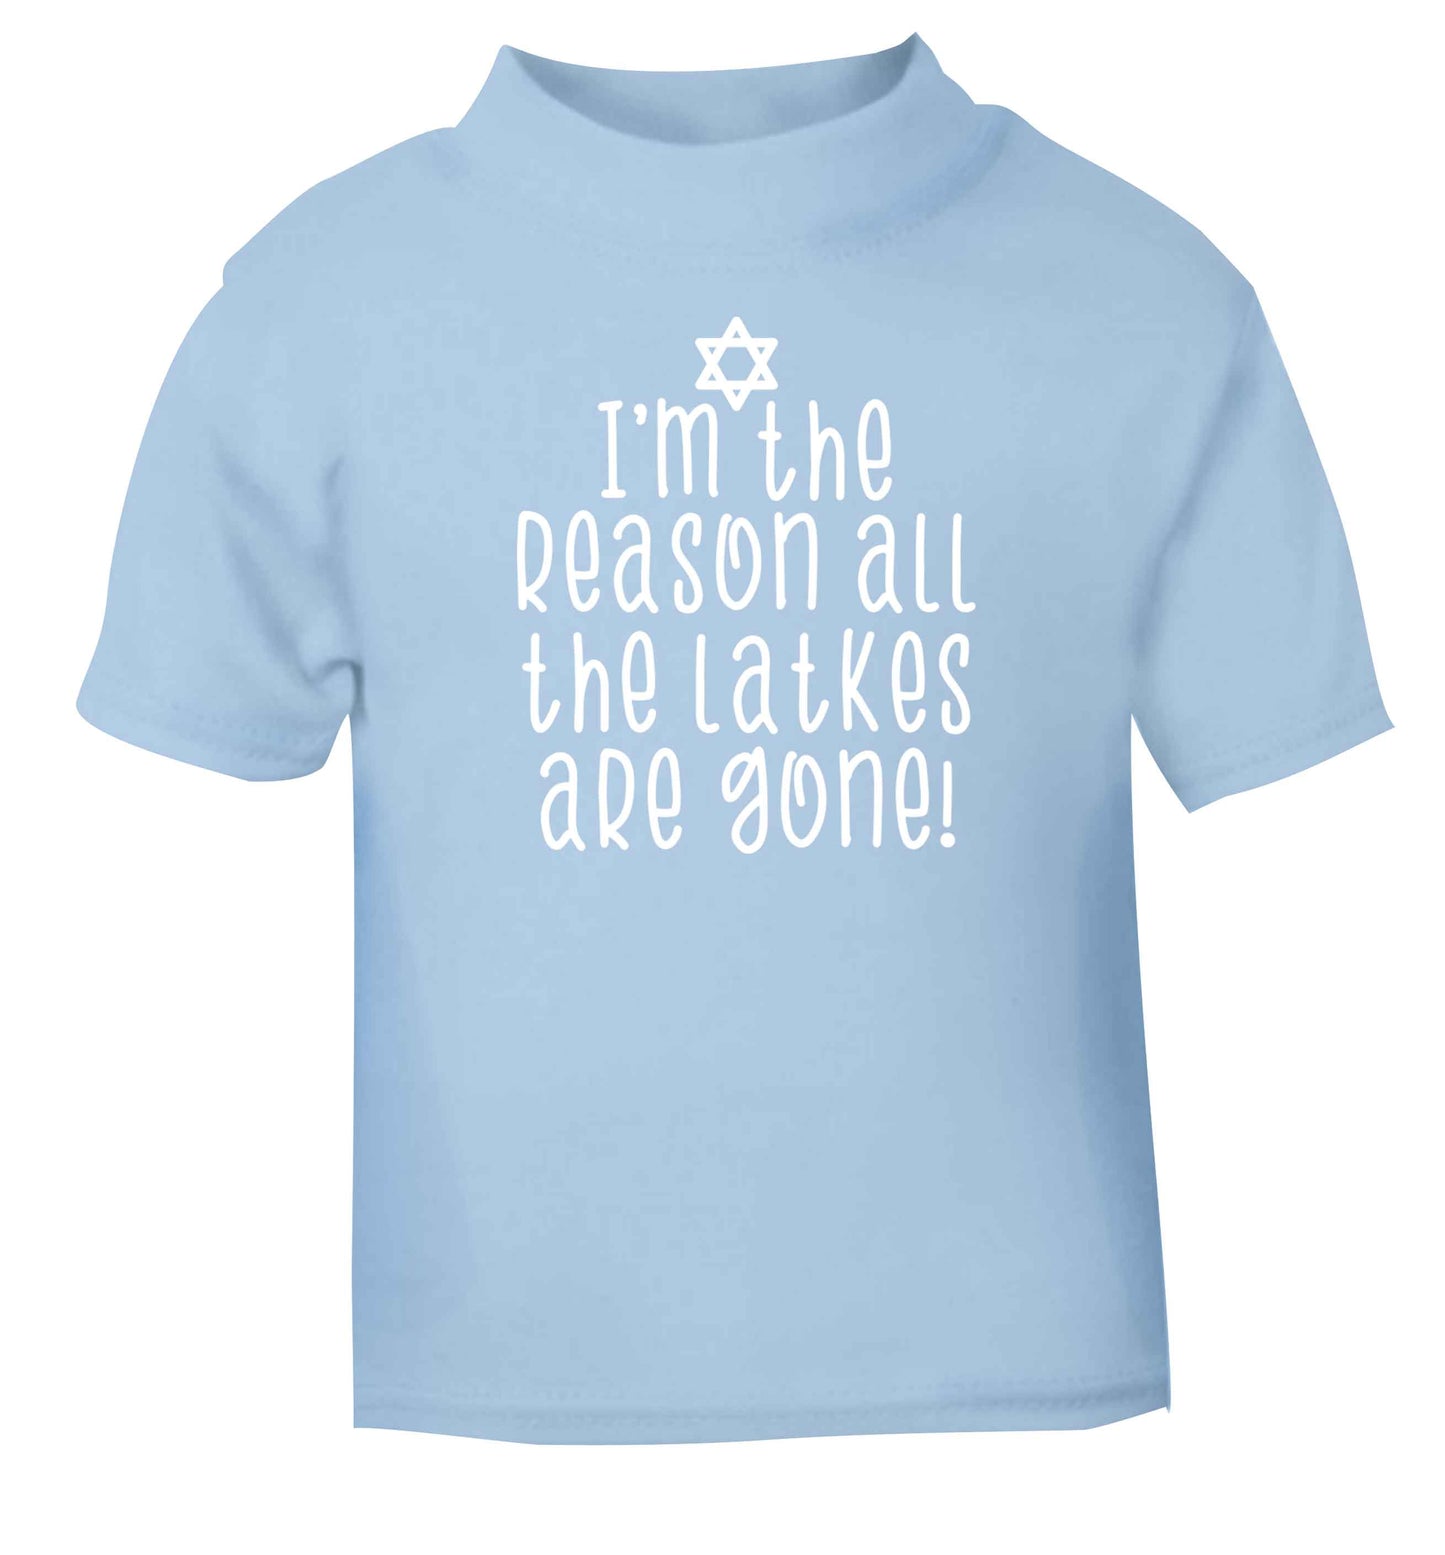 I'm the reason all the latkes are gone light blue baby toddler Tshirt 2 Years